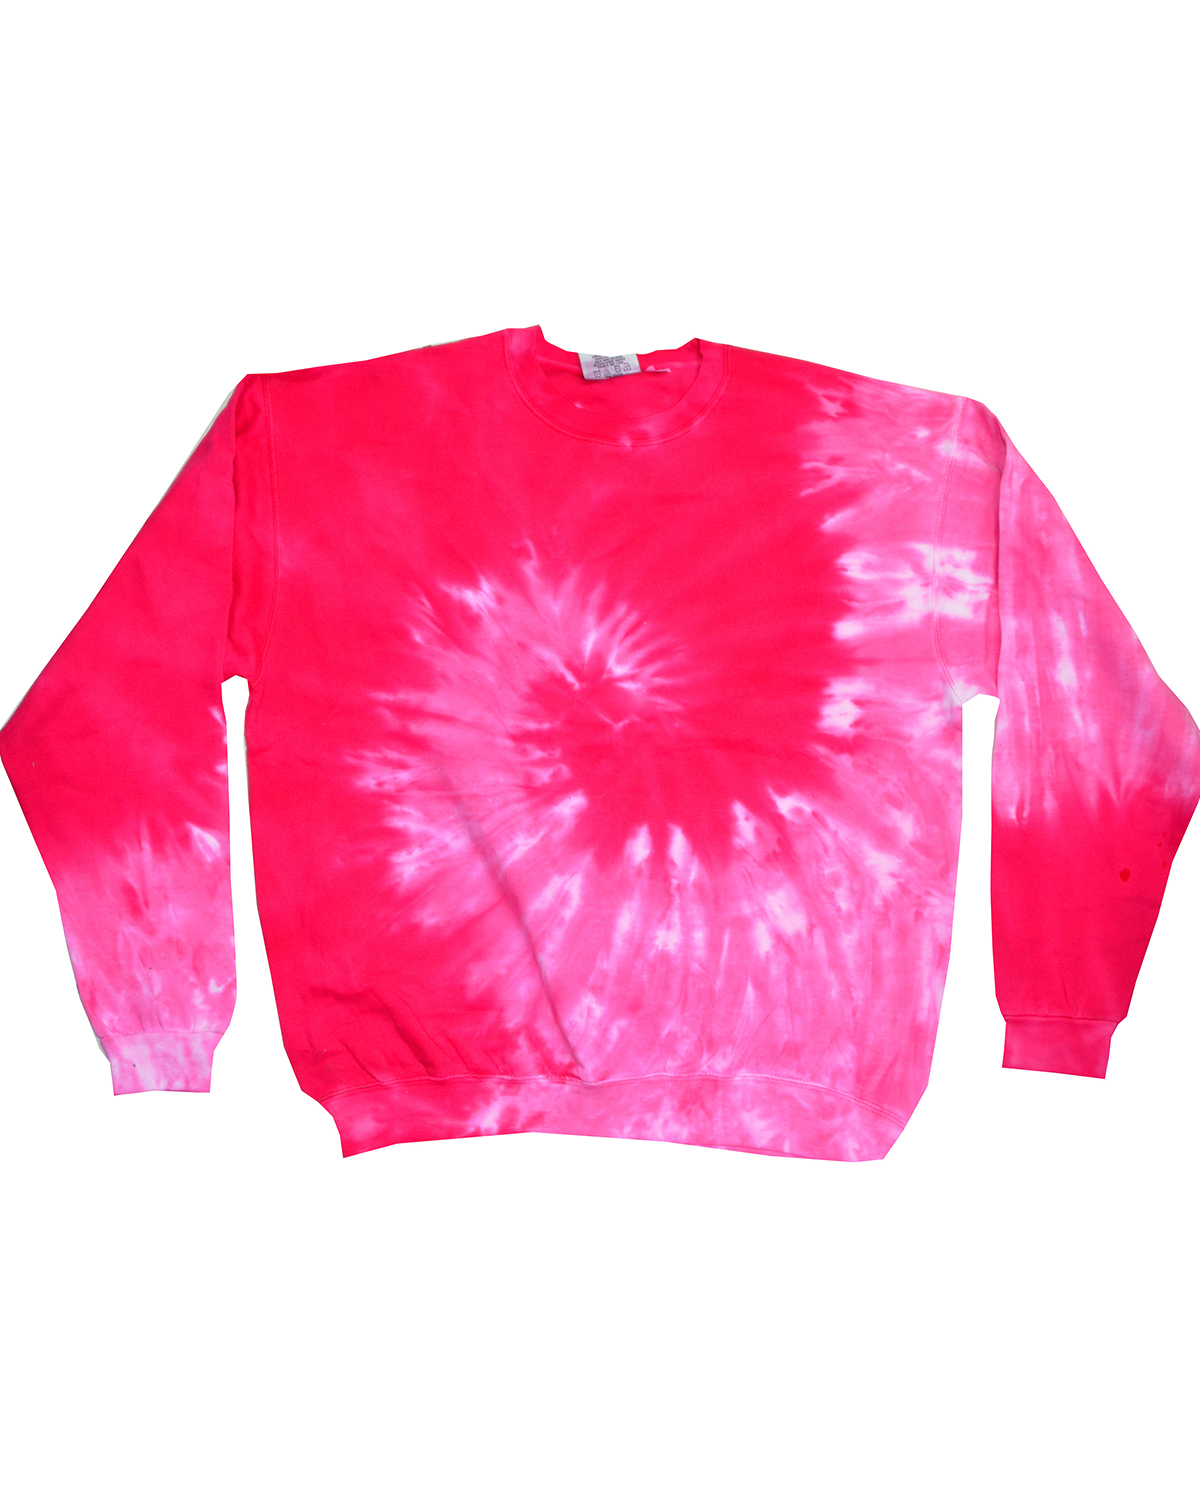 click to view SPIRAL PINK